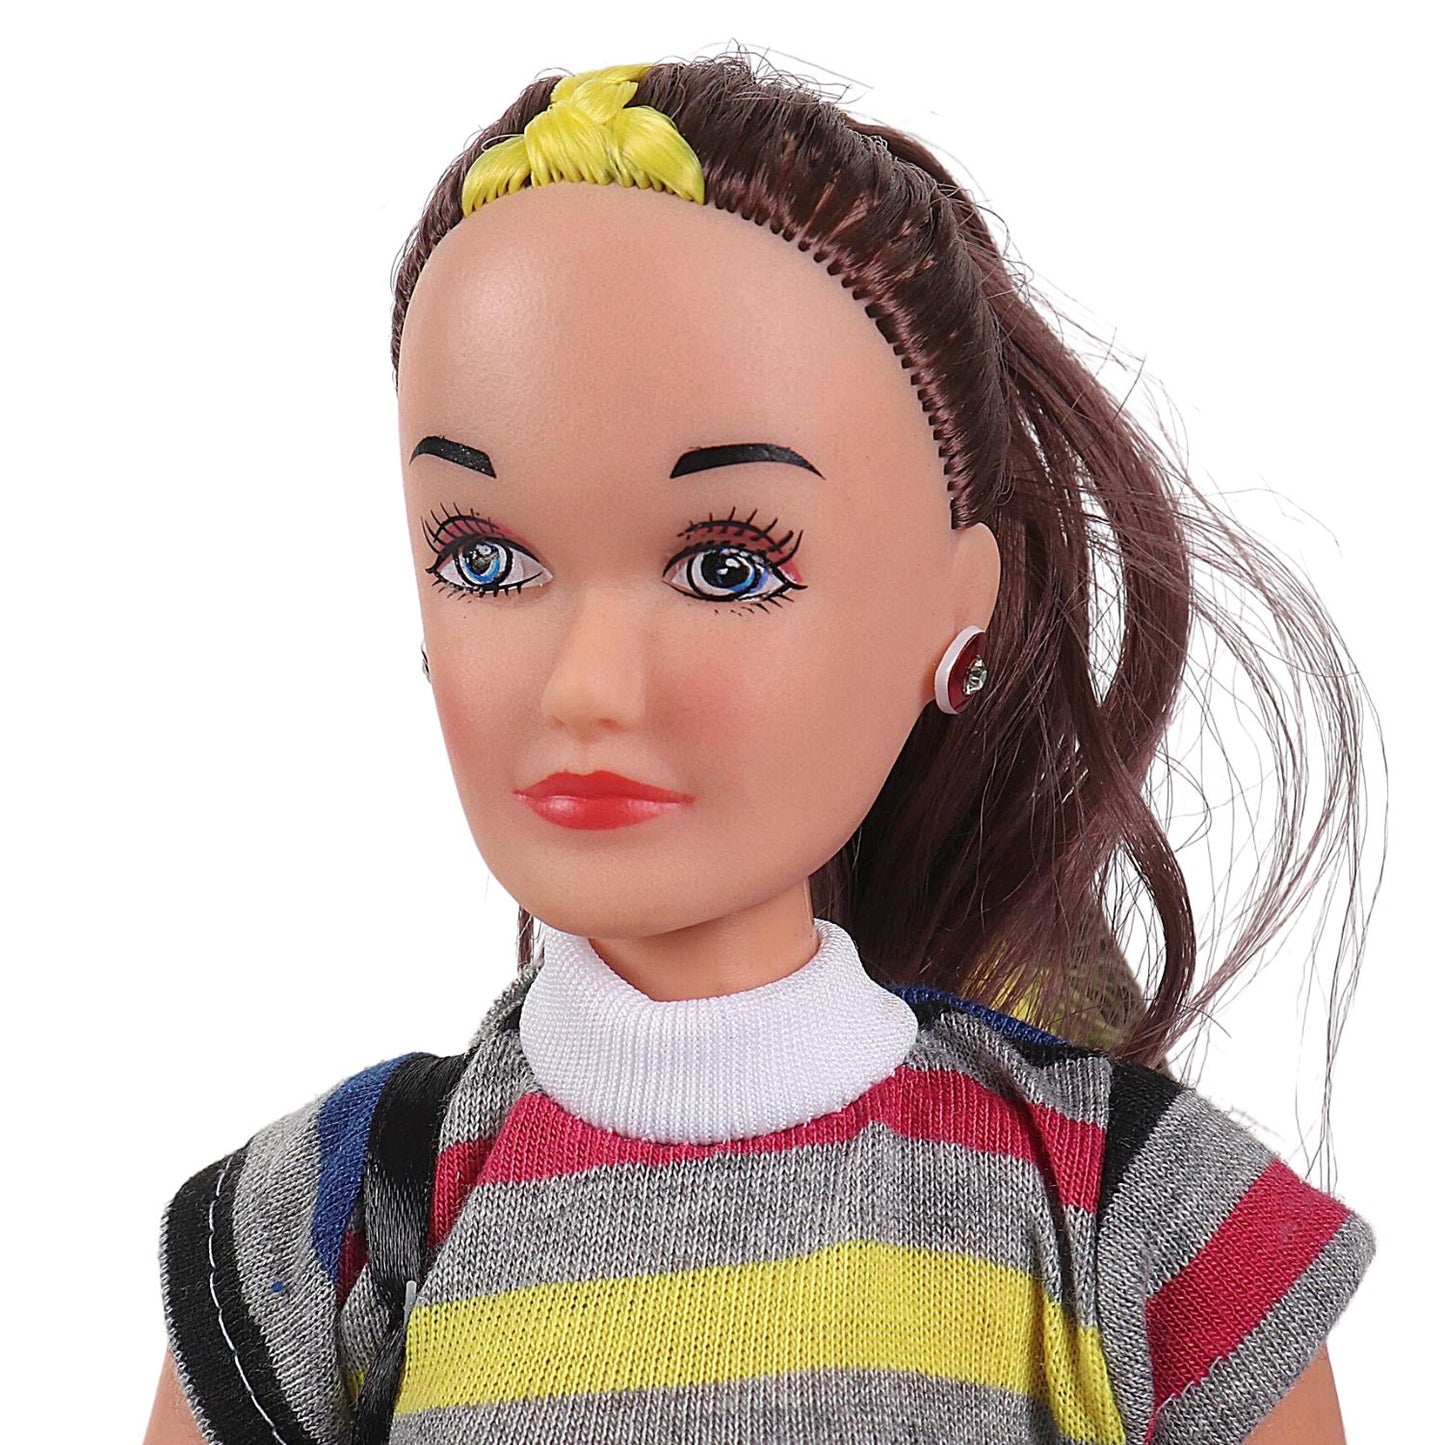 Speedage Katrina Fashion Doll for 3 to 10 Year Girls - Non-Toxic, BIS Certified, 40cm, Dress Color Varies